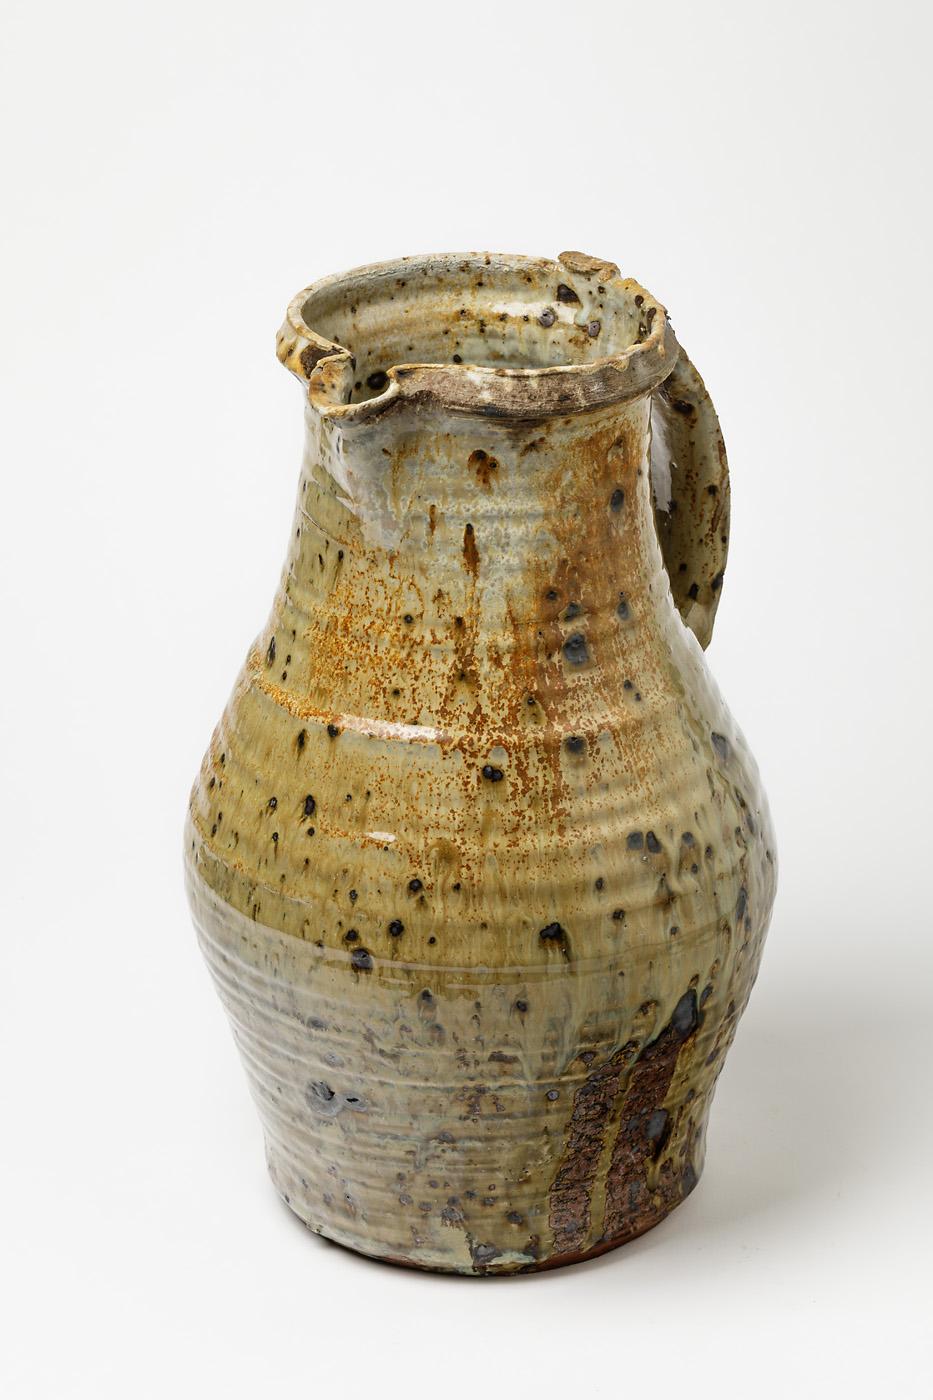 Anne Kjaersgaard (1933-2009)

Huge and amazing stoneware pottery pitcher by the Danish artist.

Amazing firing color really shinny.

Rare and collectible ceramic piece.

Dimensions: 35 x 25 x 22 cm.